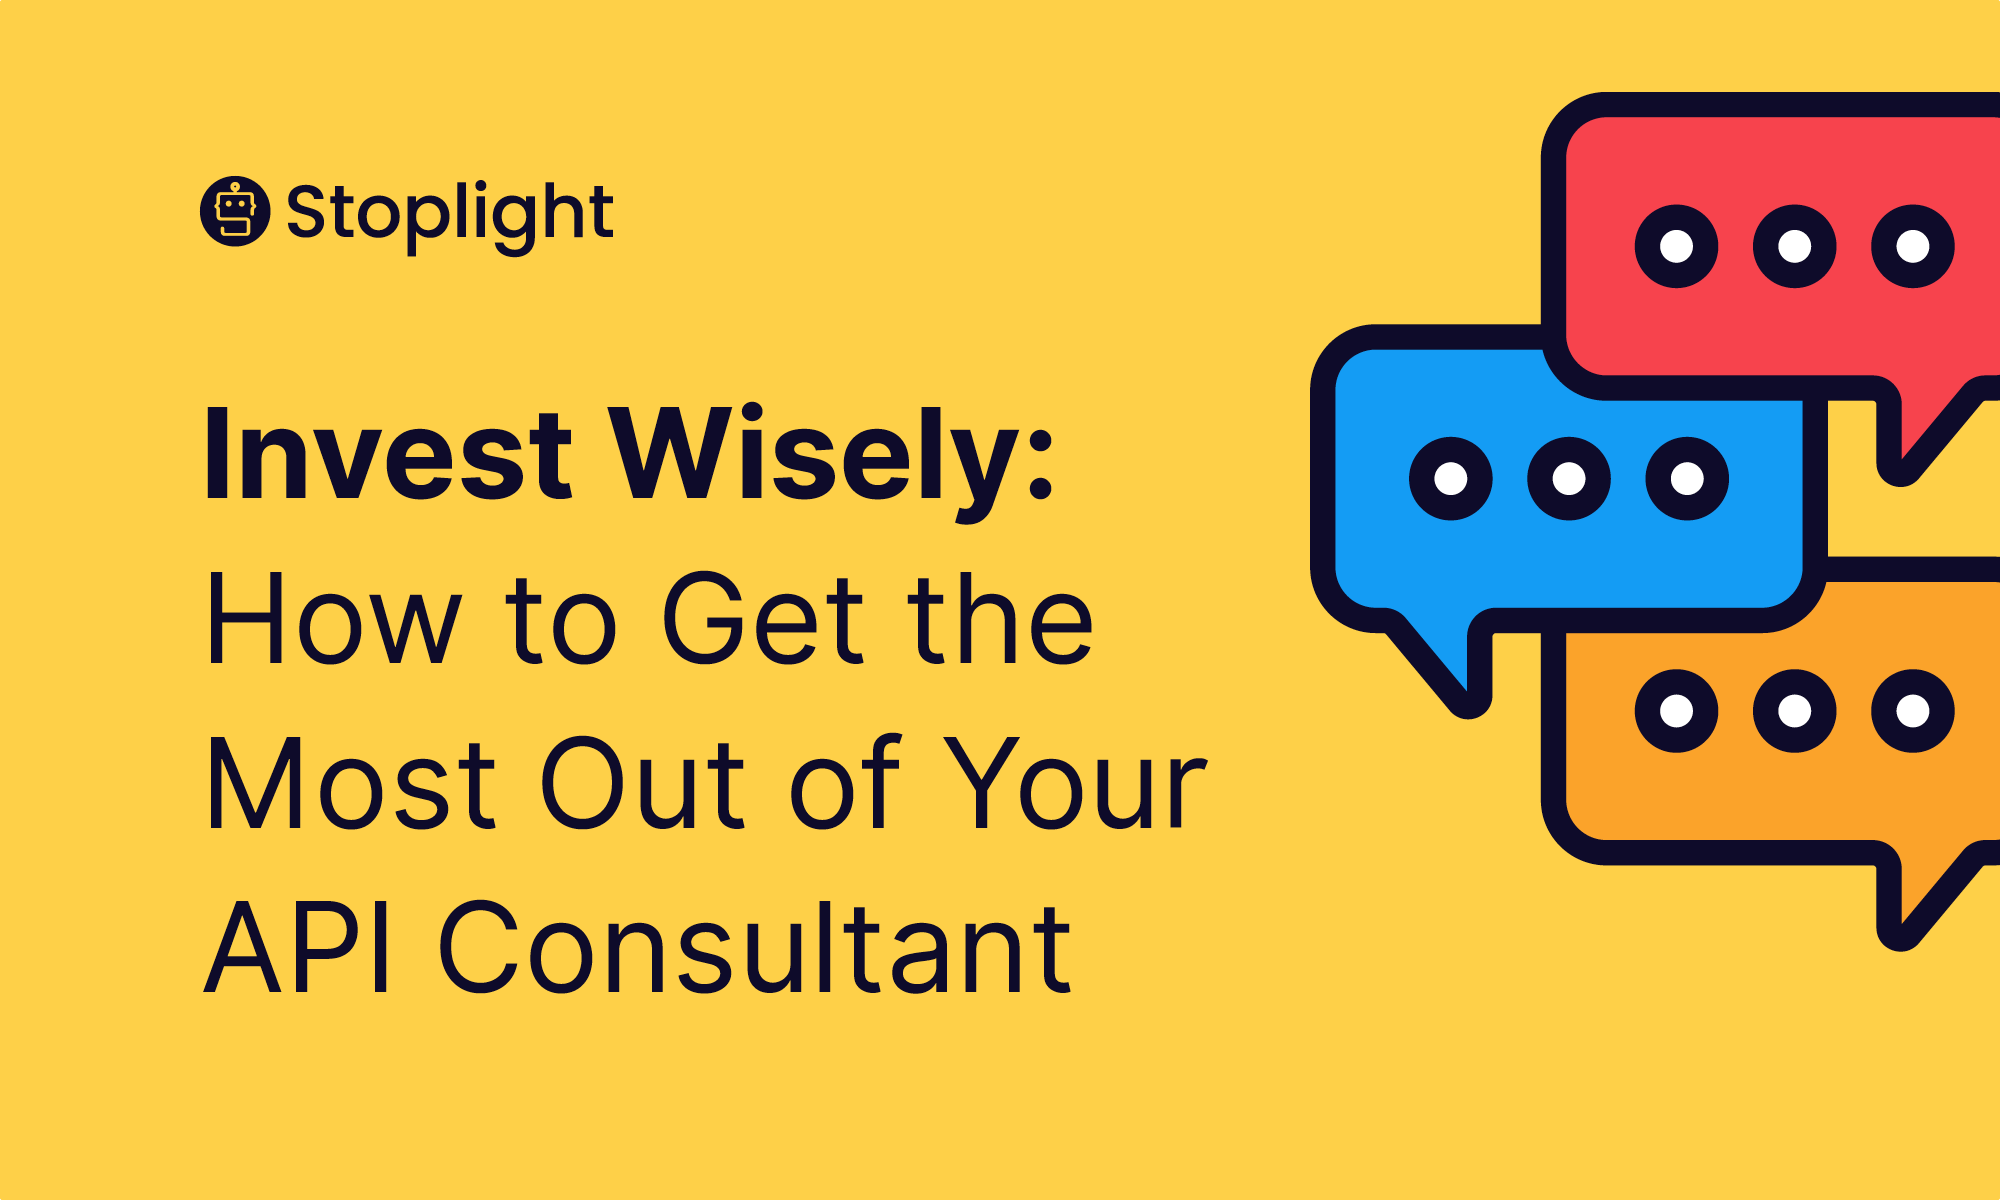 Invest Wisely: How to Get the Most Out of Your API Consultant